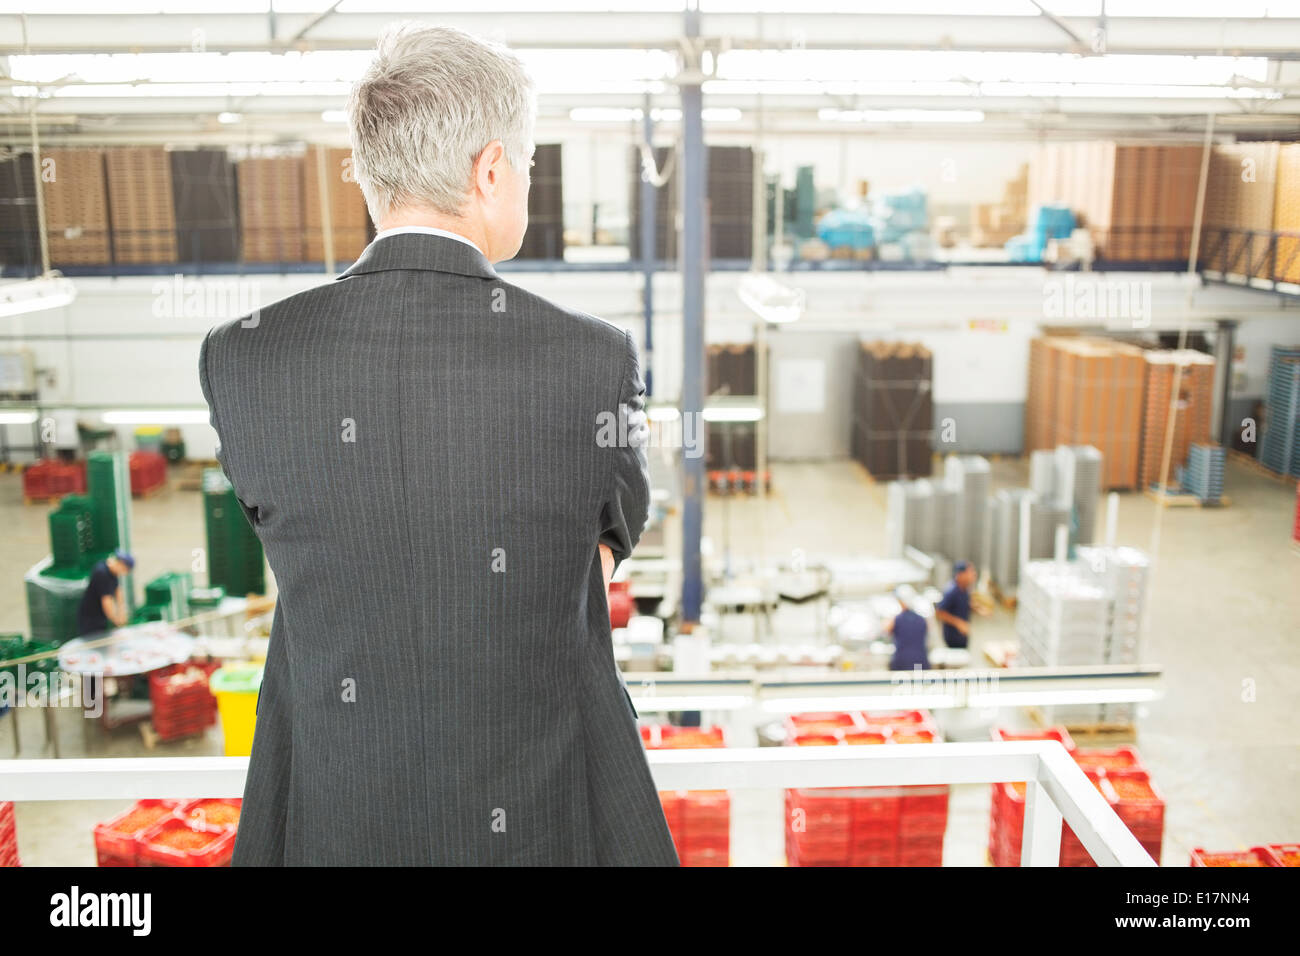 Supervisor watching workers in food processing plant Stock Photo